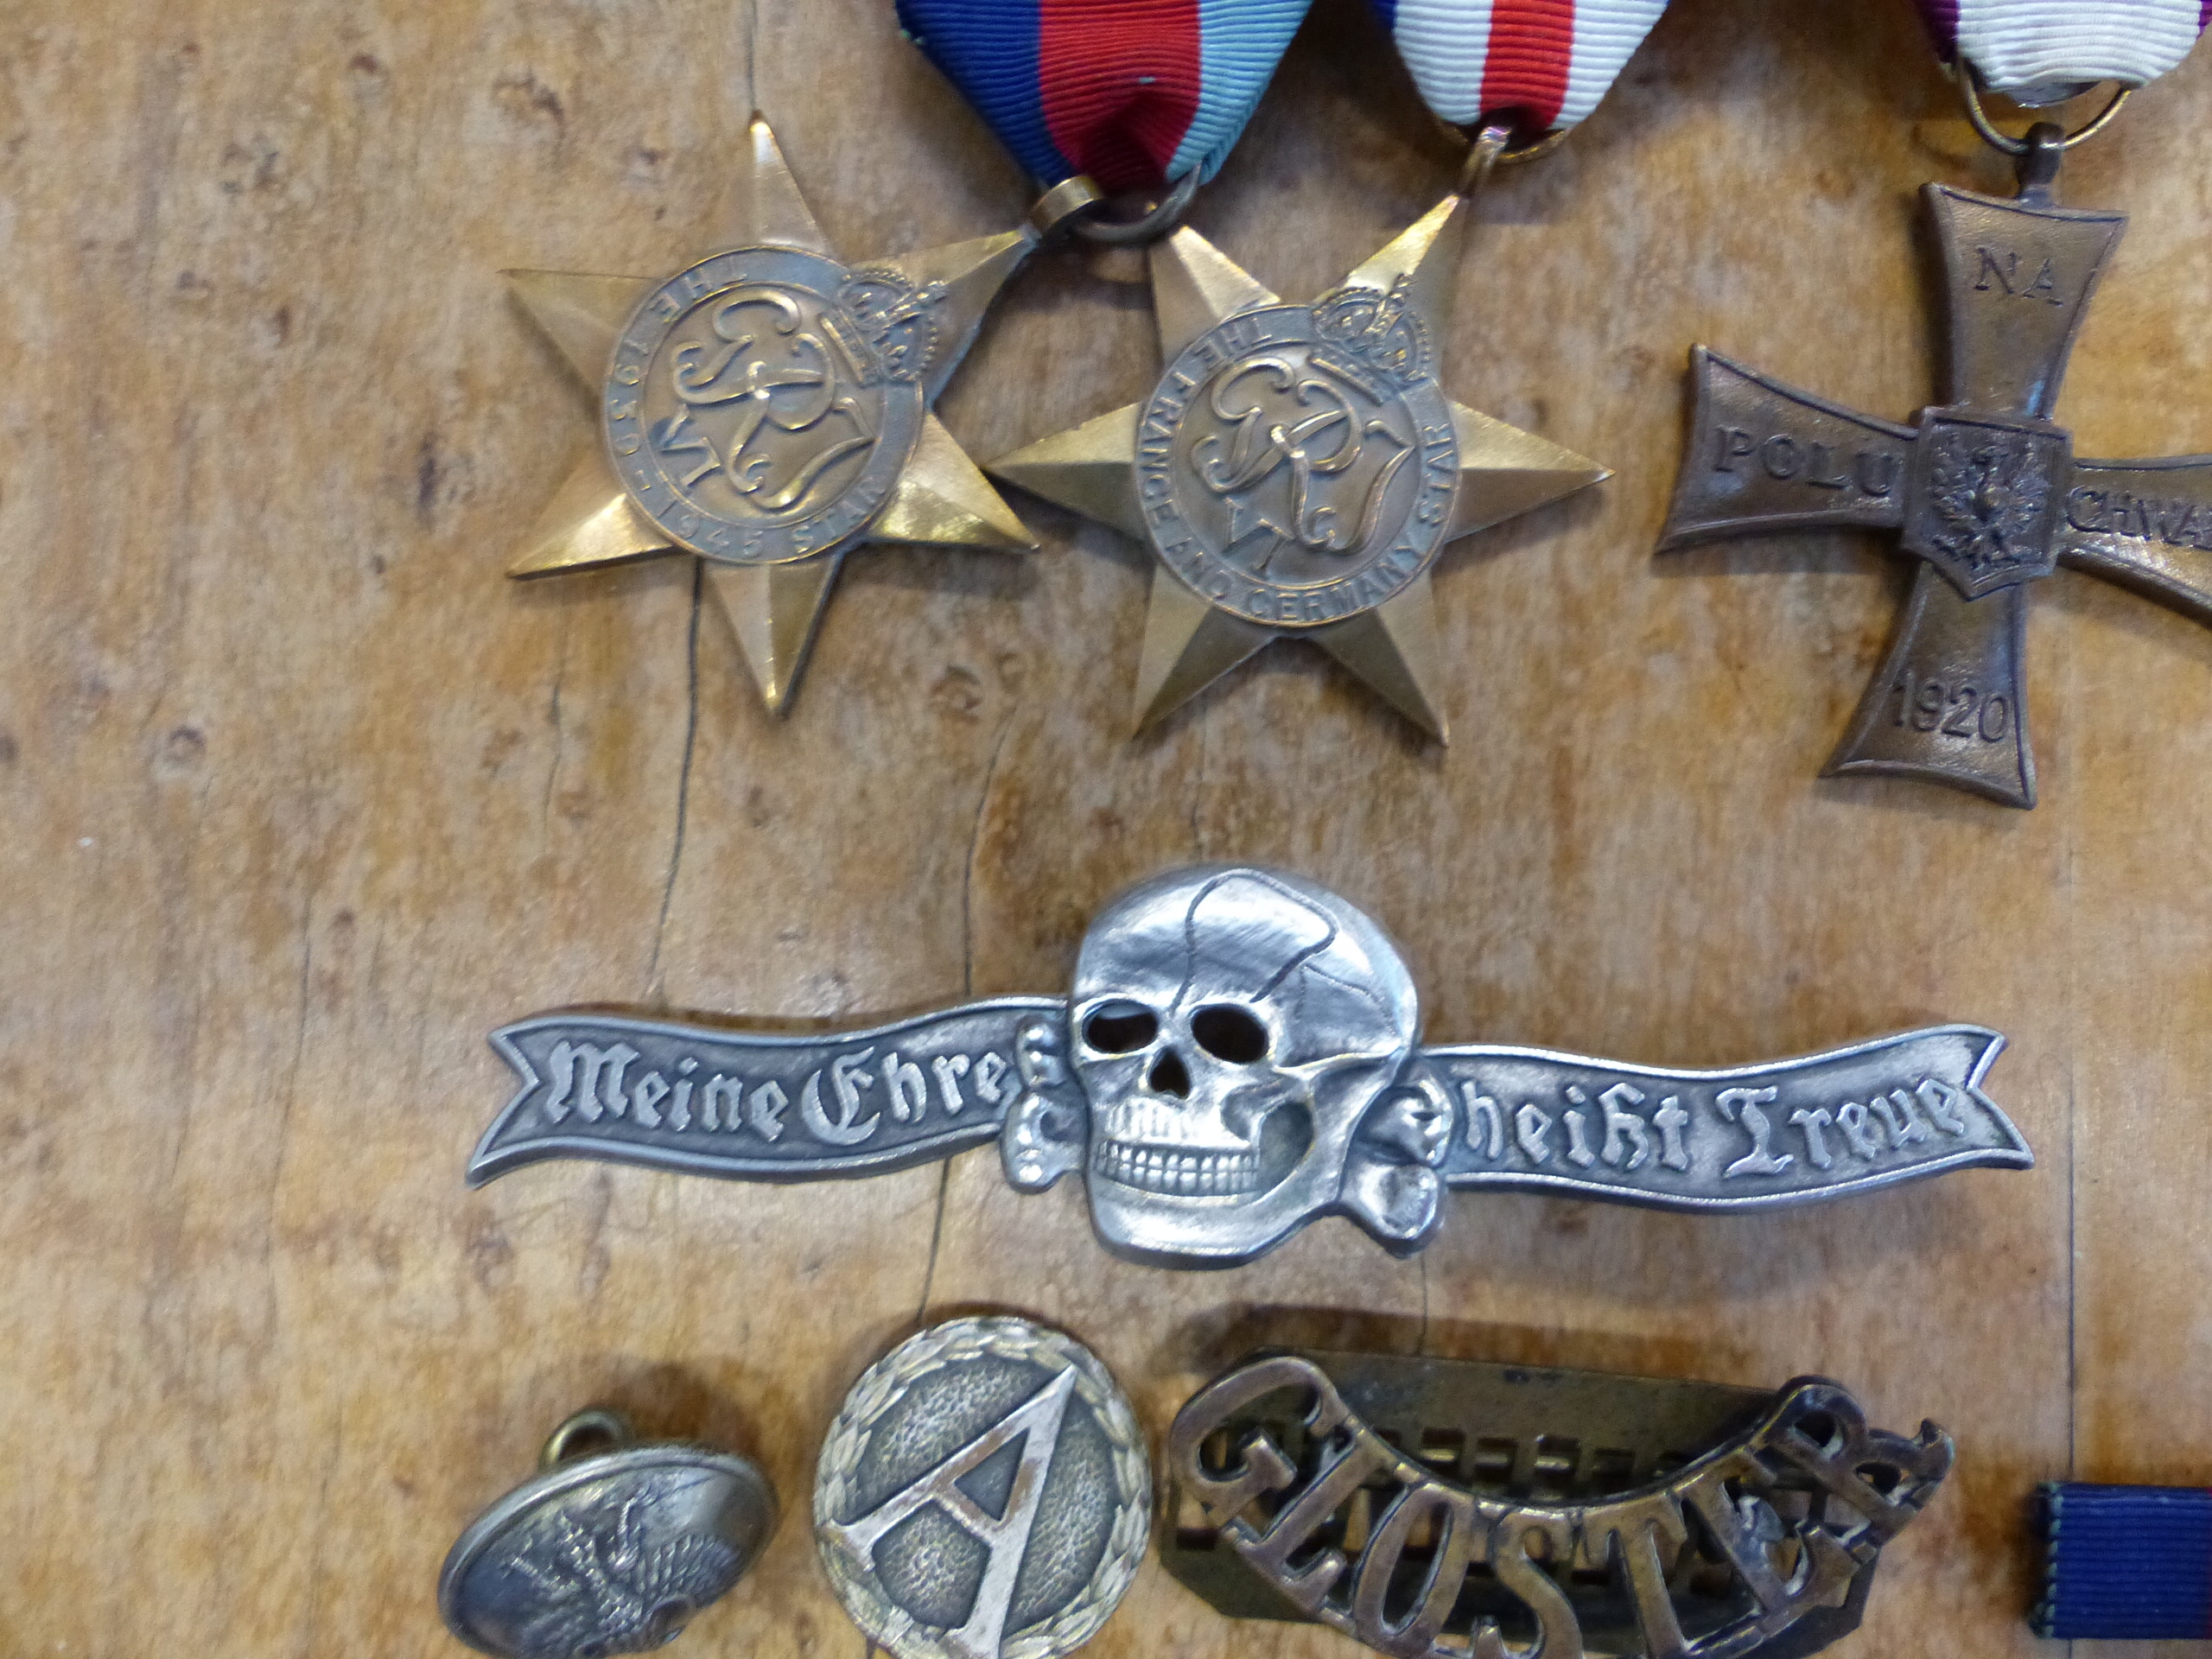 A SMALL COLLECTION OF FIRST AND SECOND WAR BRITISH AND GERMAN MEDALS, CAP BADGES, CLOTH BADGES ETC. - Image 10 of 20